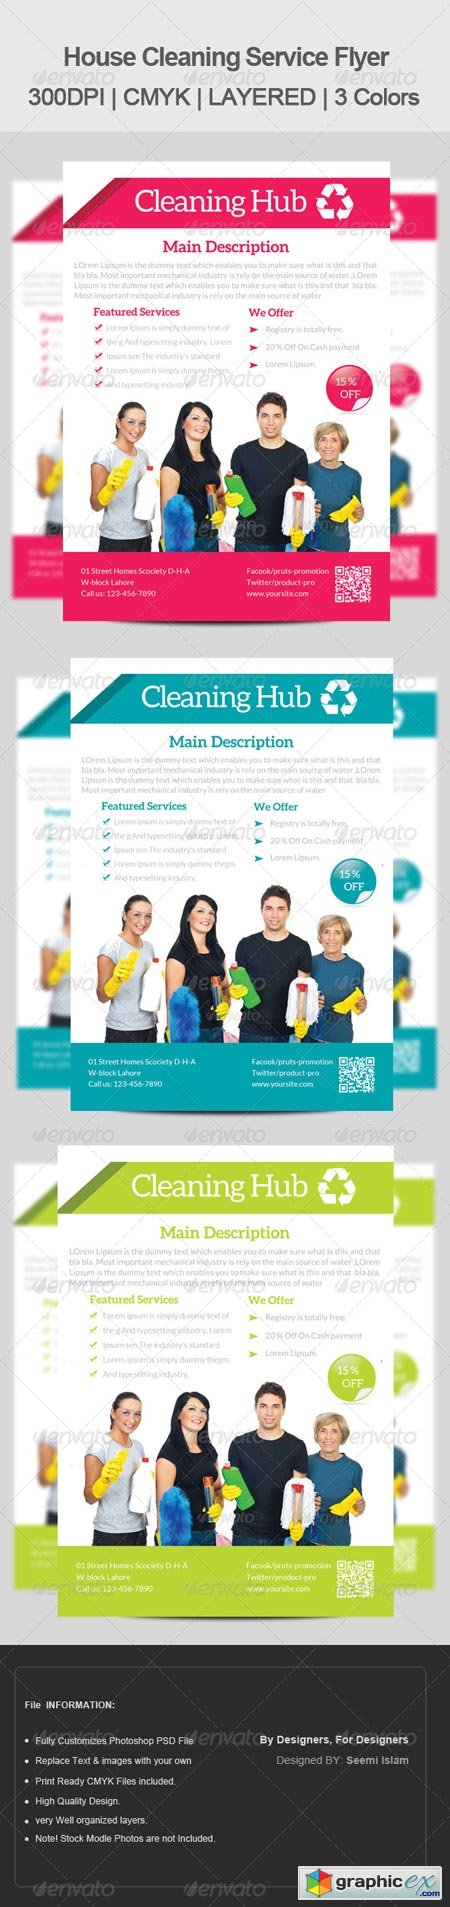 House Cleaning Services Flyer Template 6680889